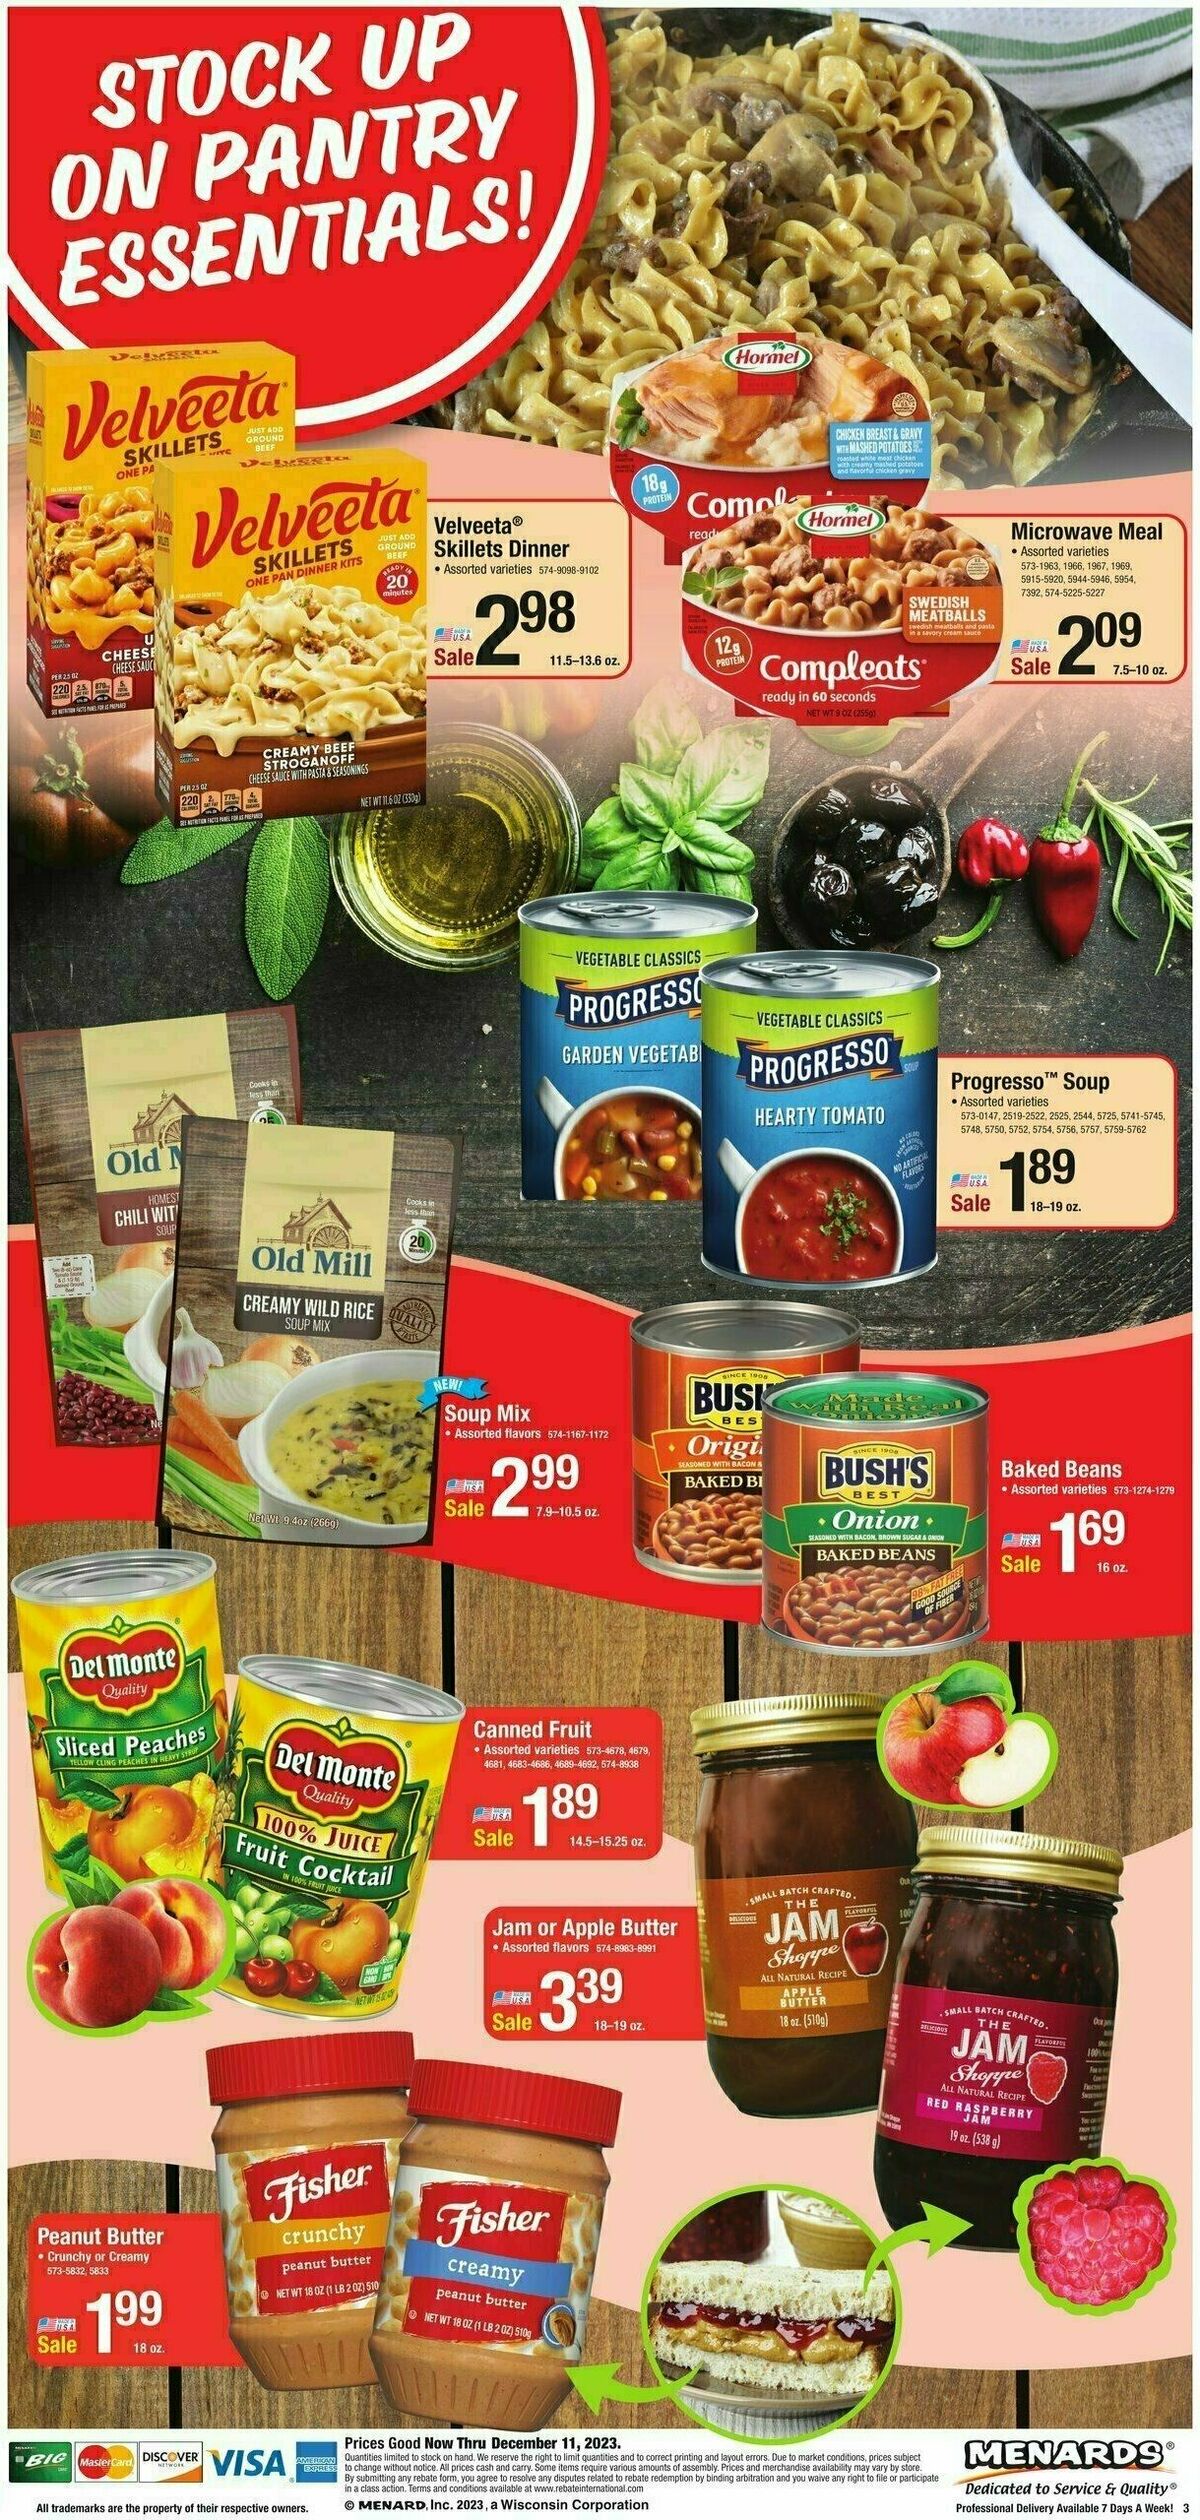 Menards Home Essentials Weekly Ad from November 29